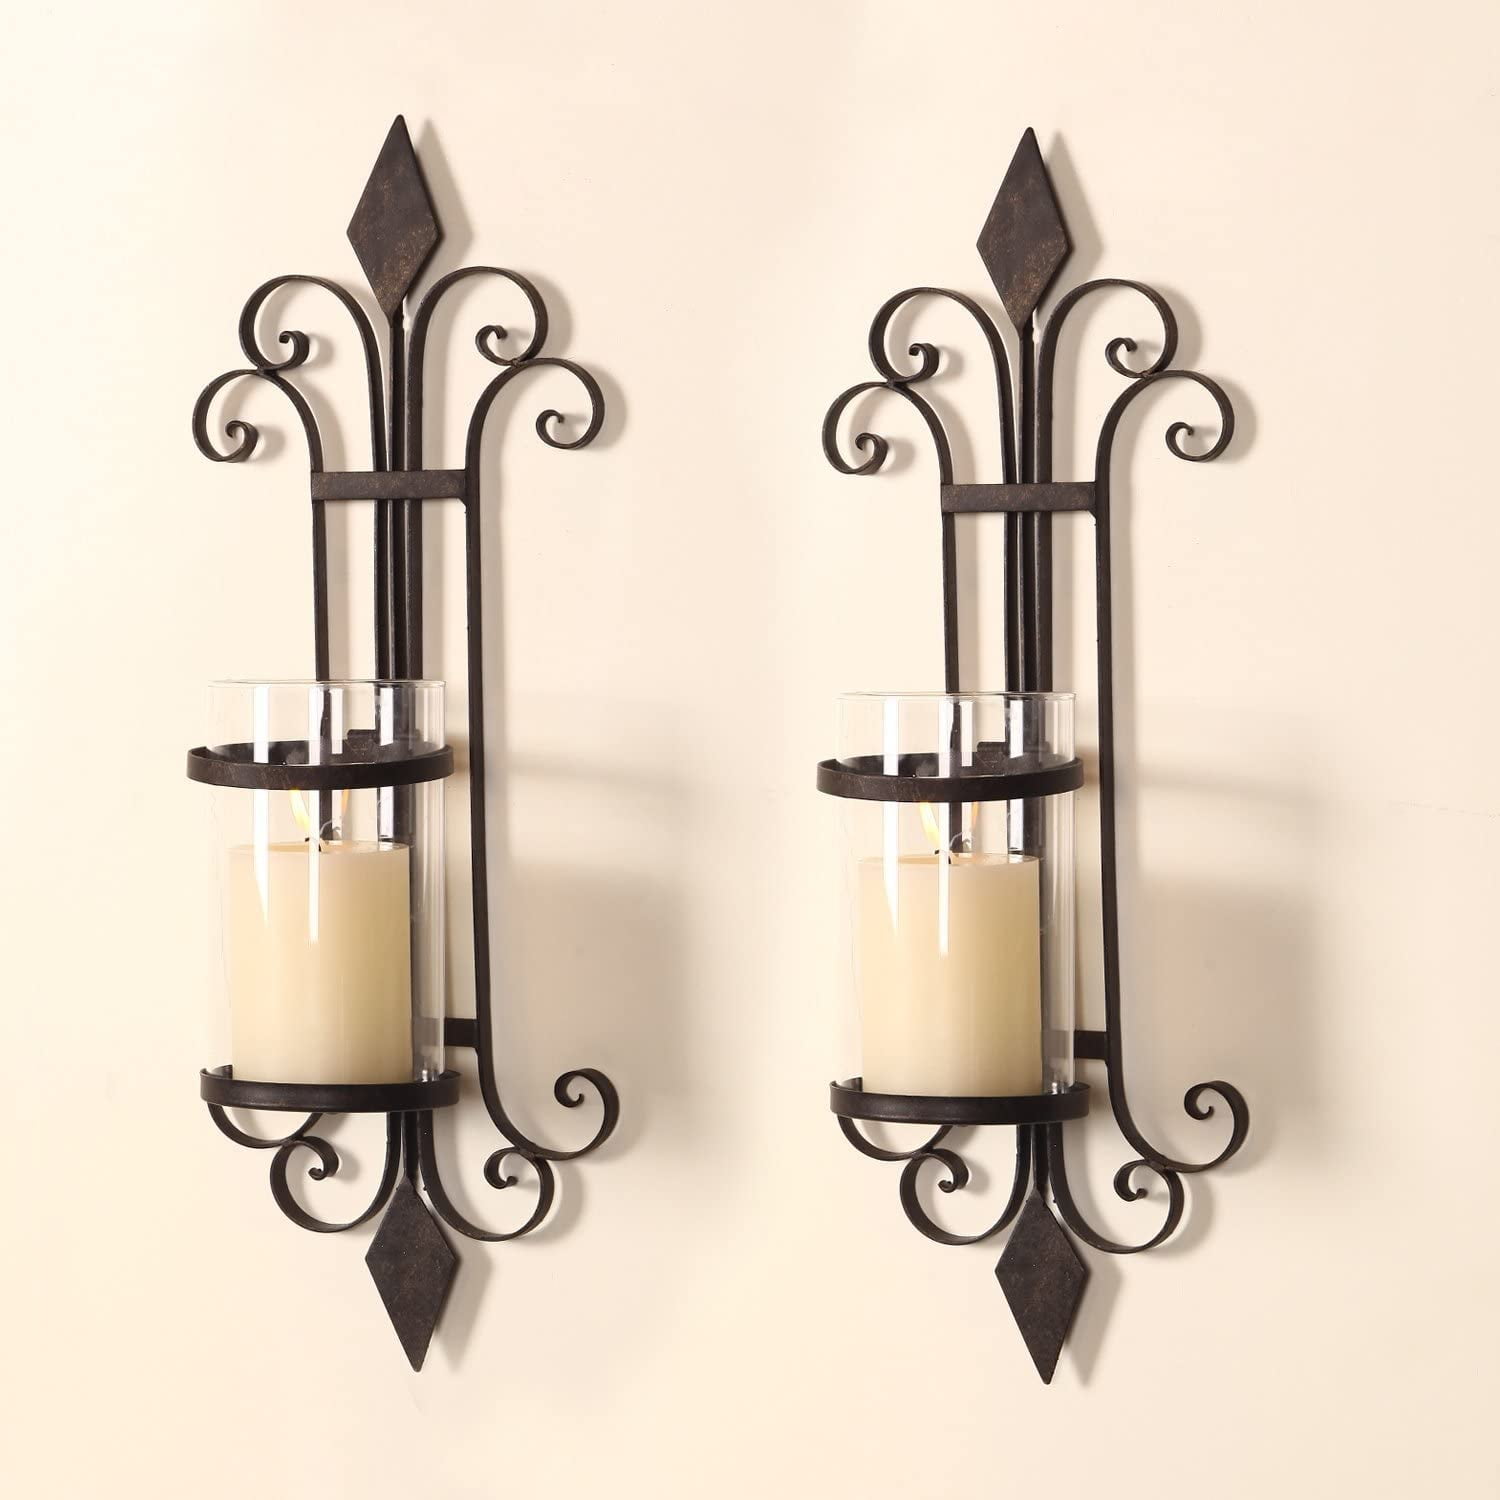 Antique Silver Scroll Wall Sconce Candle Holder FREE SHIPPING 